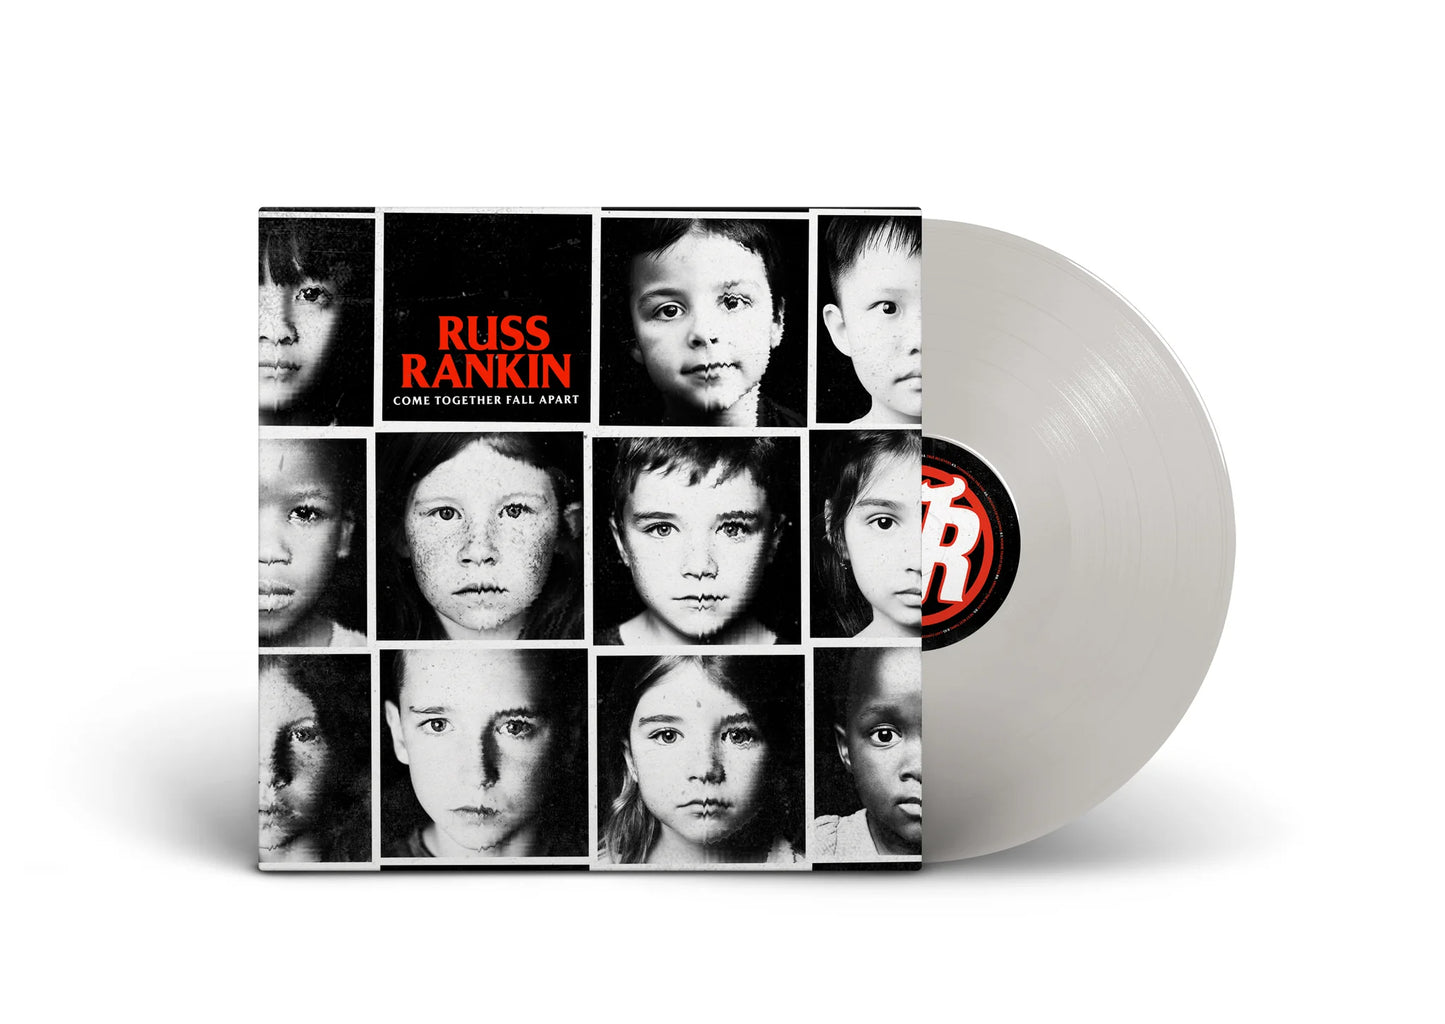 RUSS RANKIN - "Come Together Fall Apart" (SBAM) (LP)